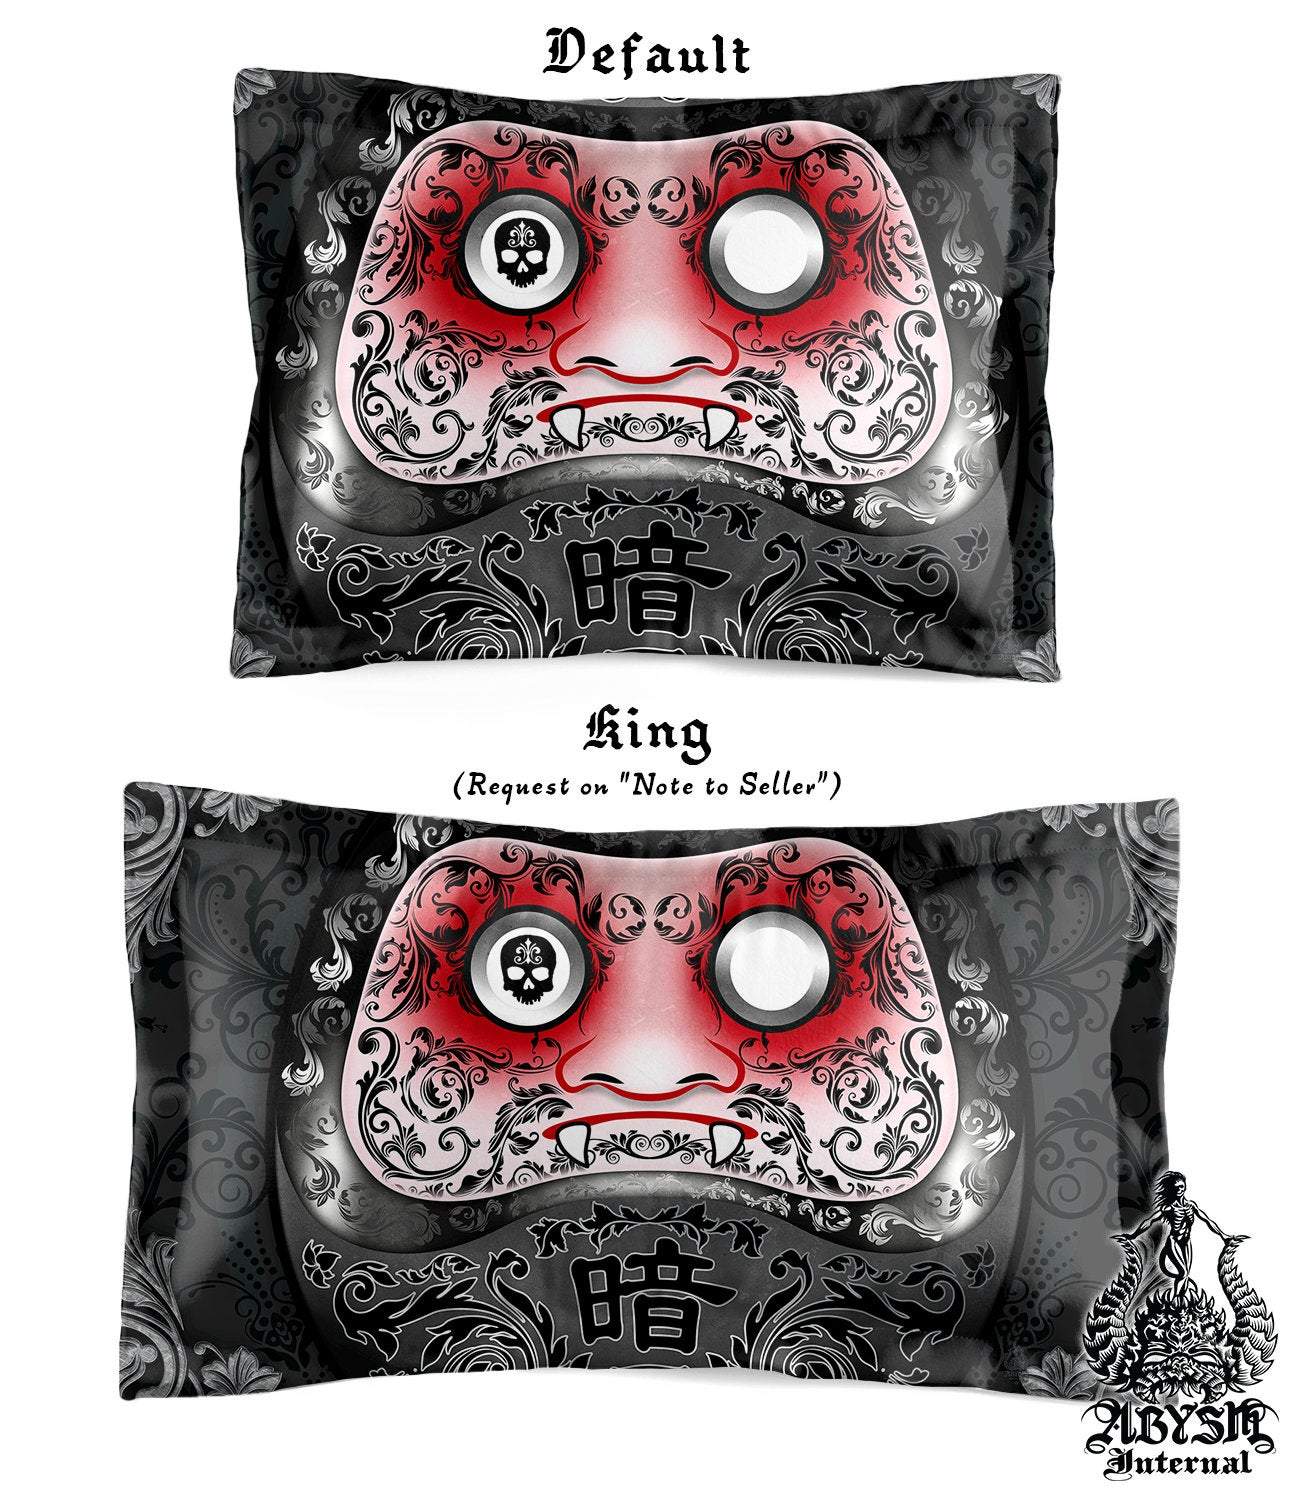 Daruma Bedding Set, Comforter and Duvet, Funny Gothic Bed Cover and Bedroom Decor, King, Queen and Twin Size - Japanese Art - Abysm Internal